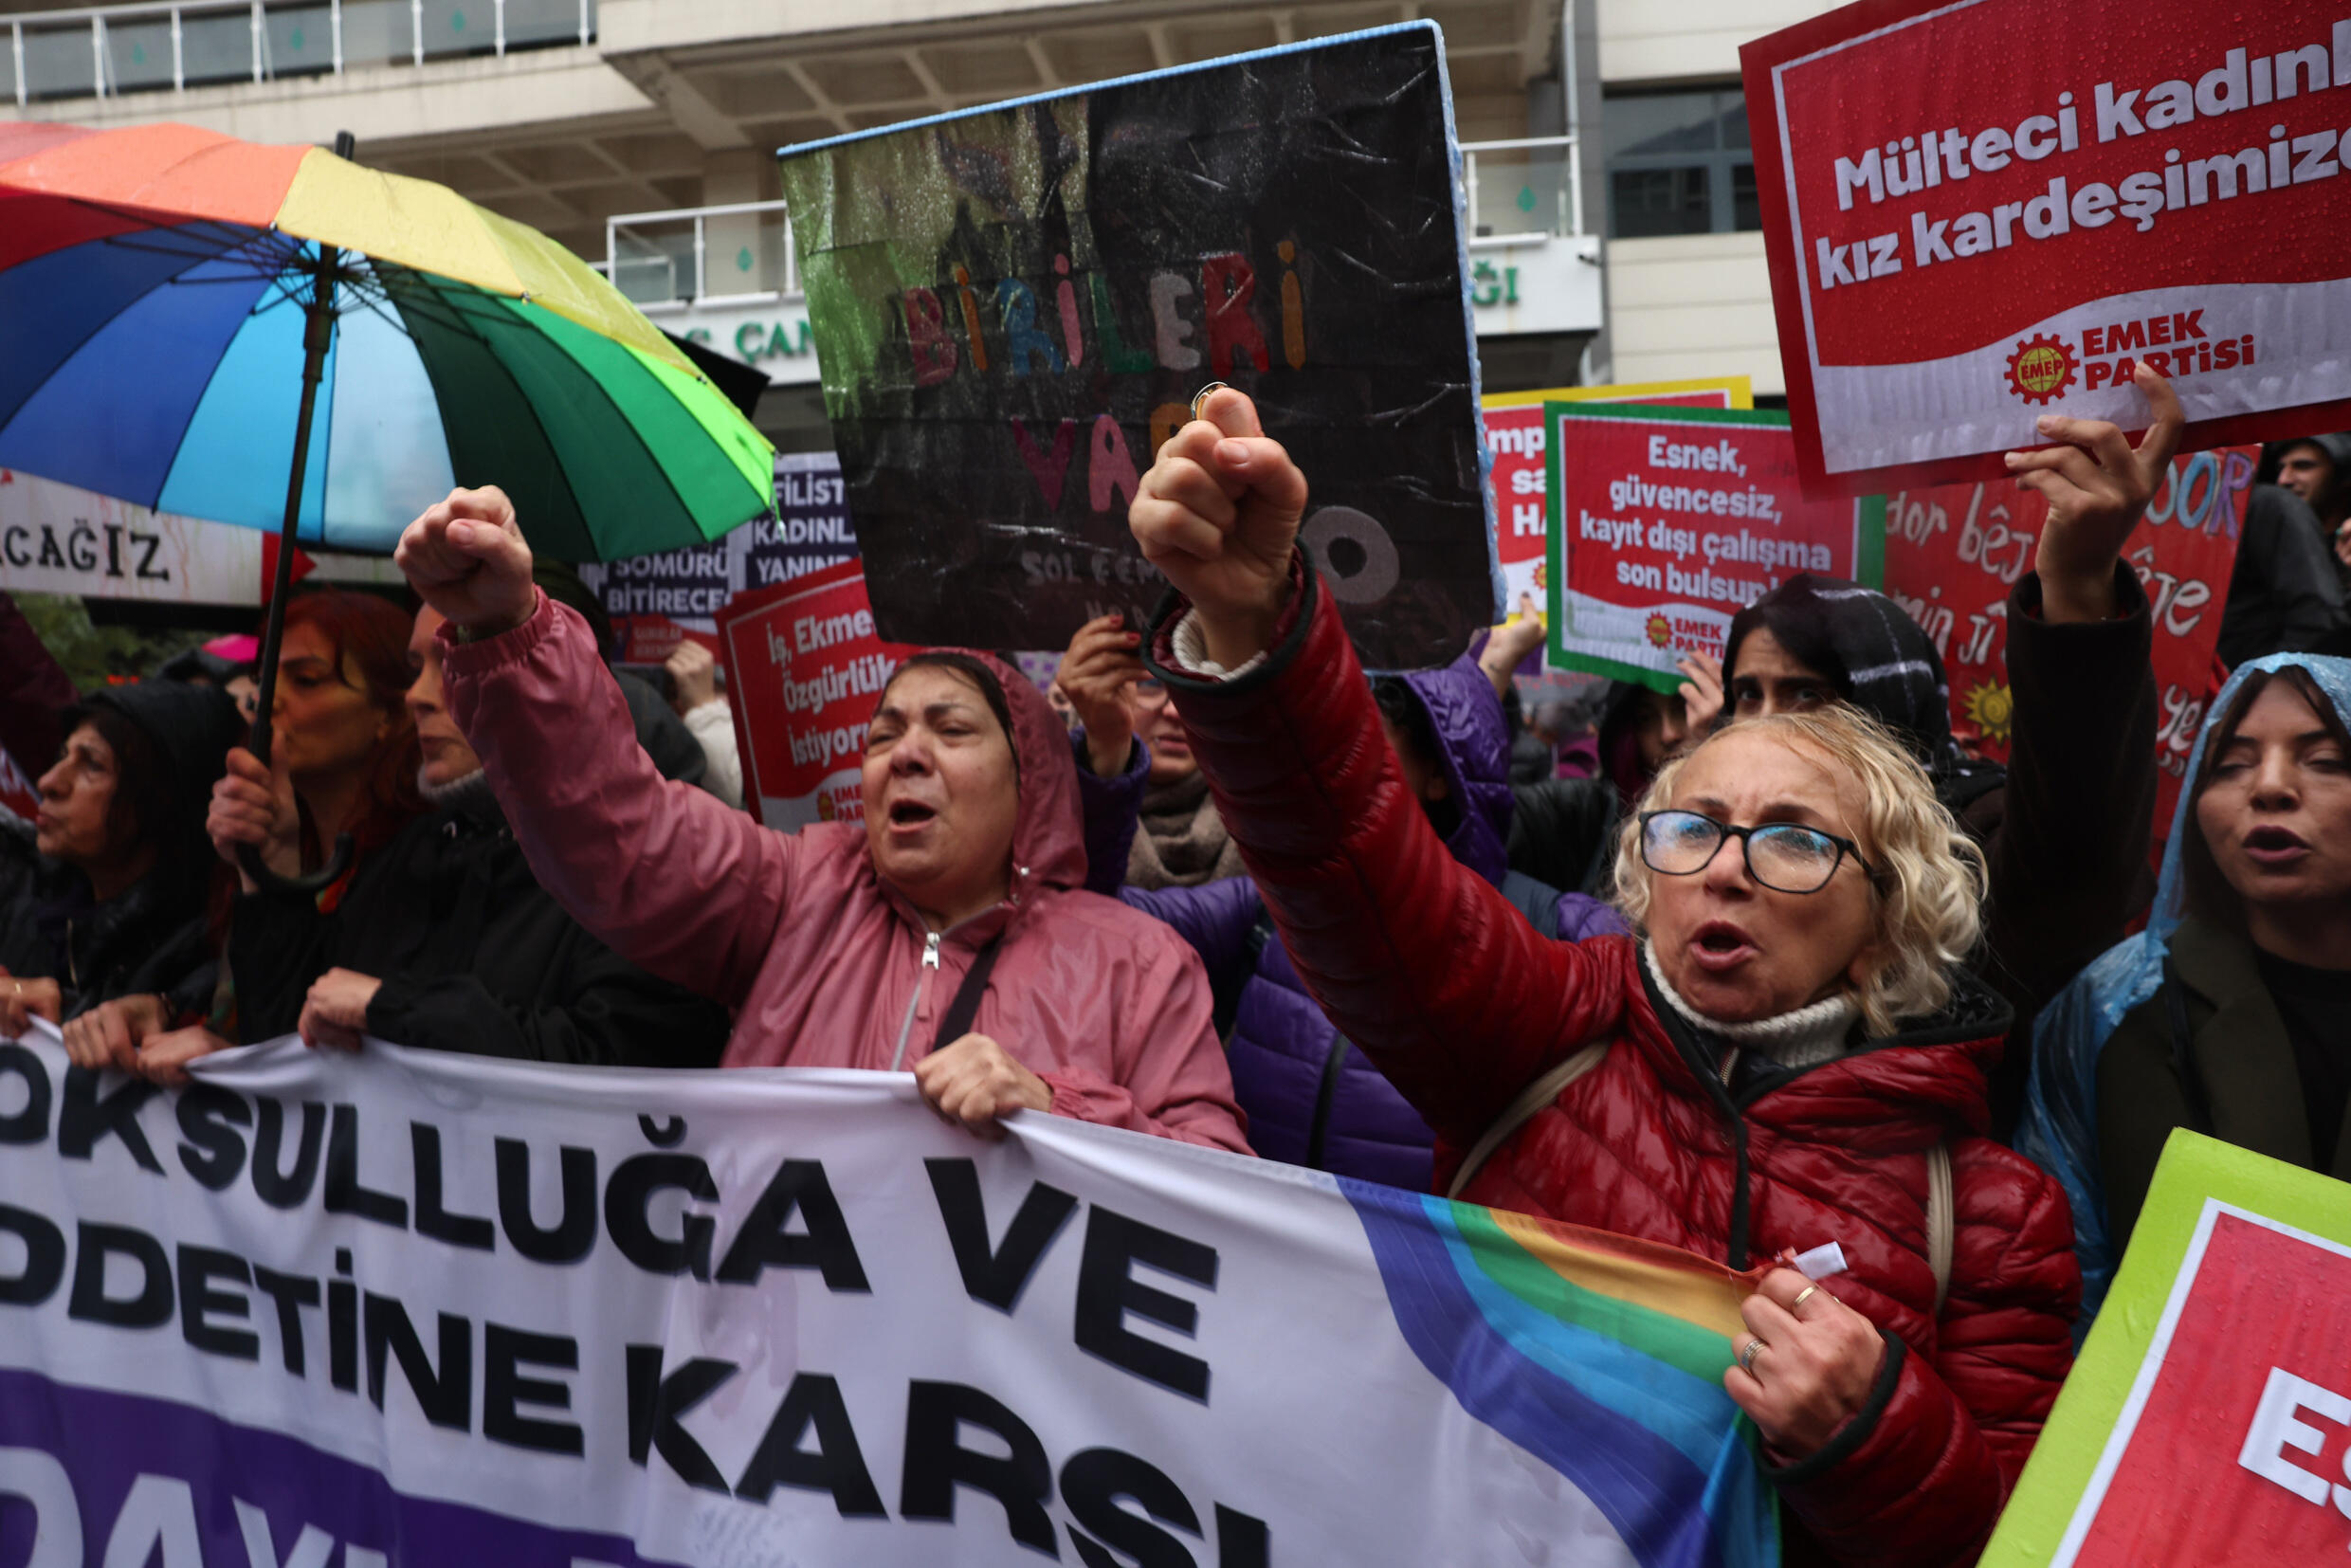 In Turkey, protesters marched in Ankara and Istanbul